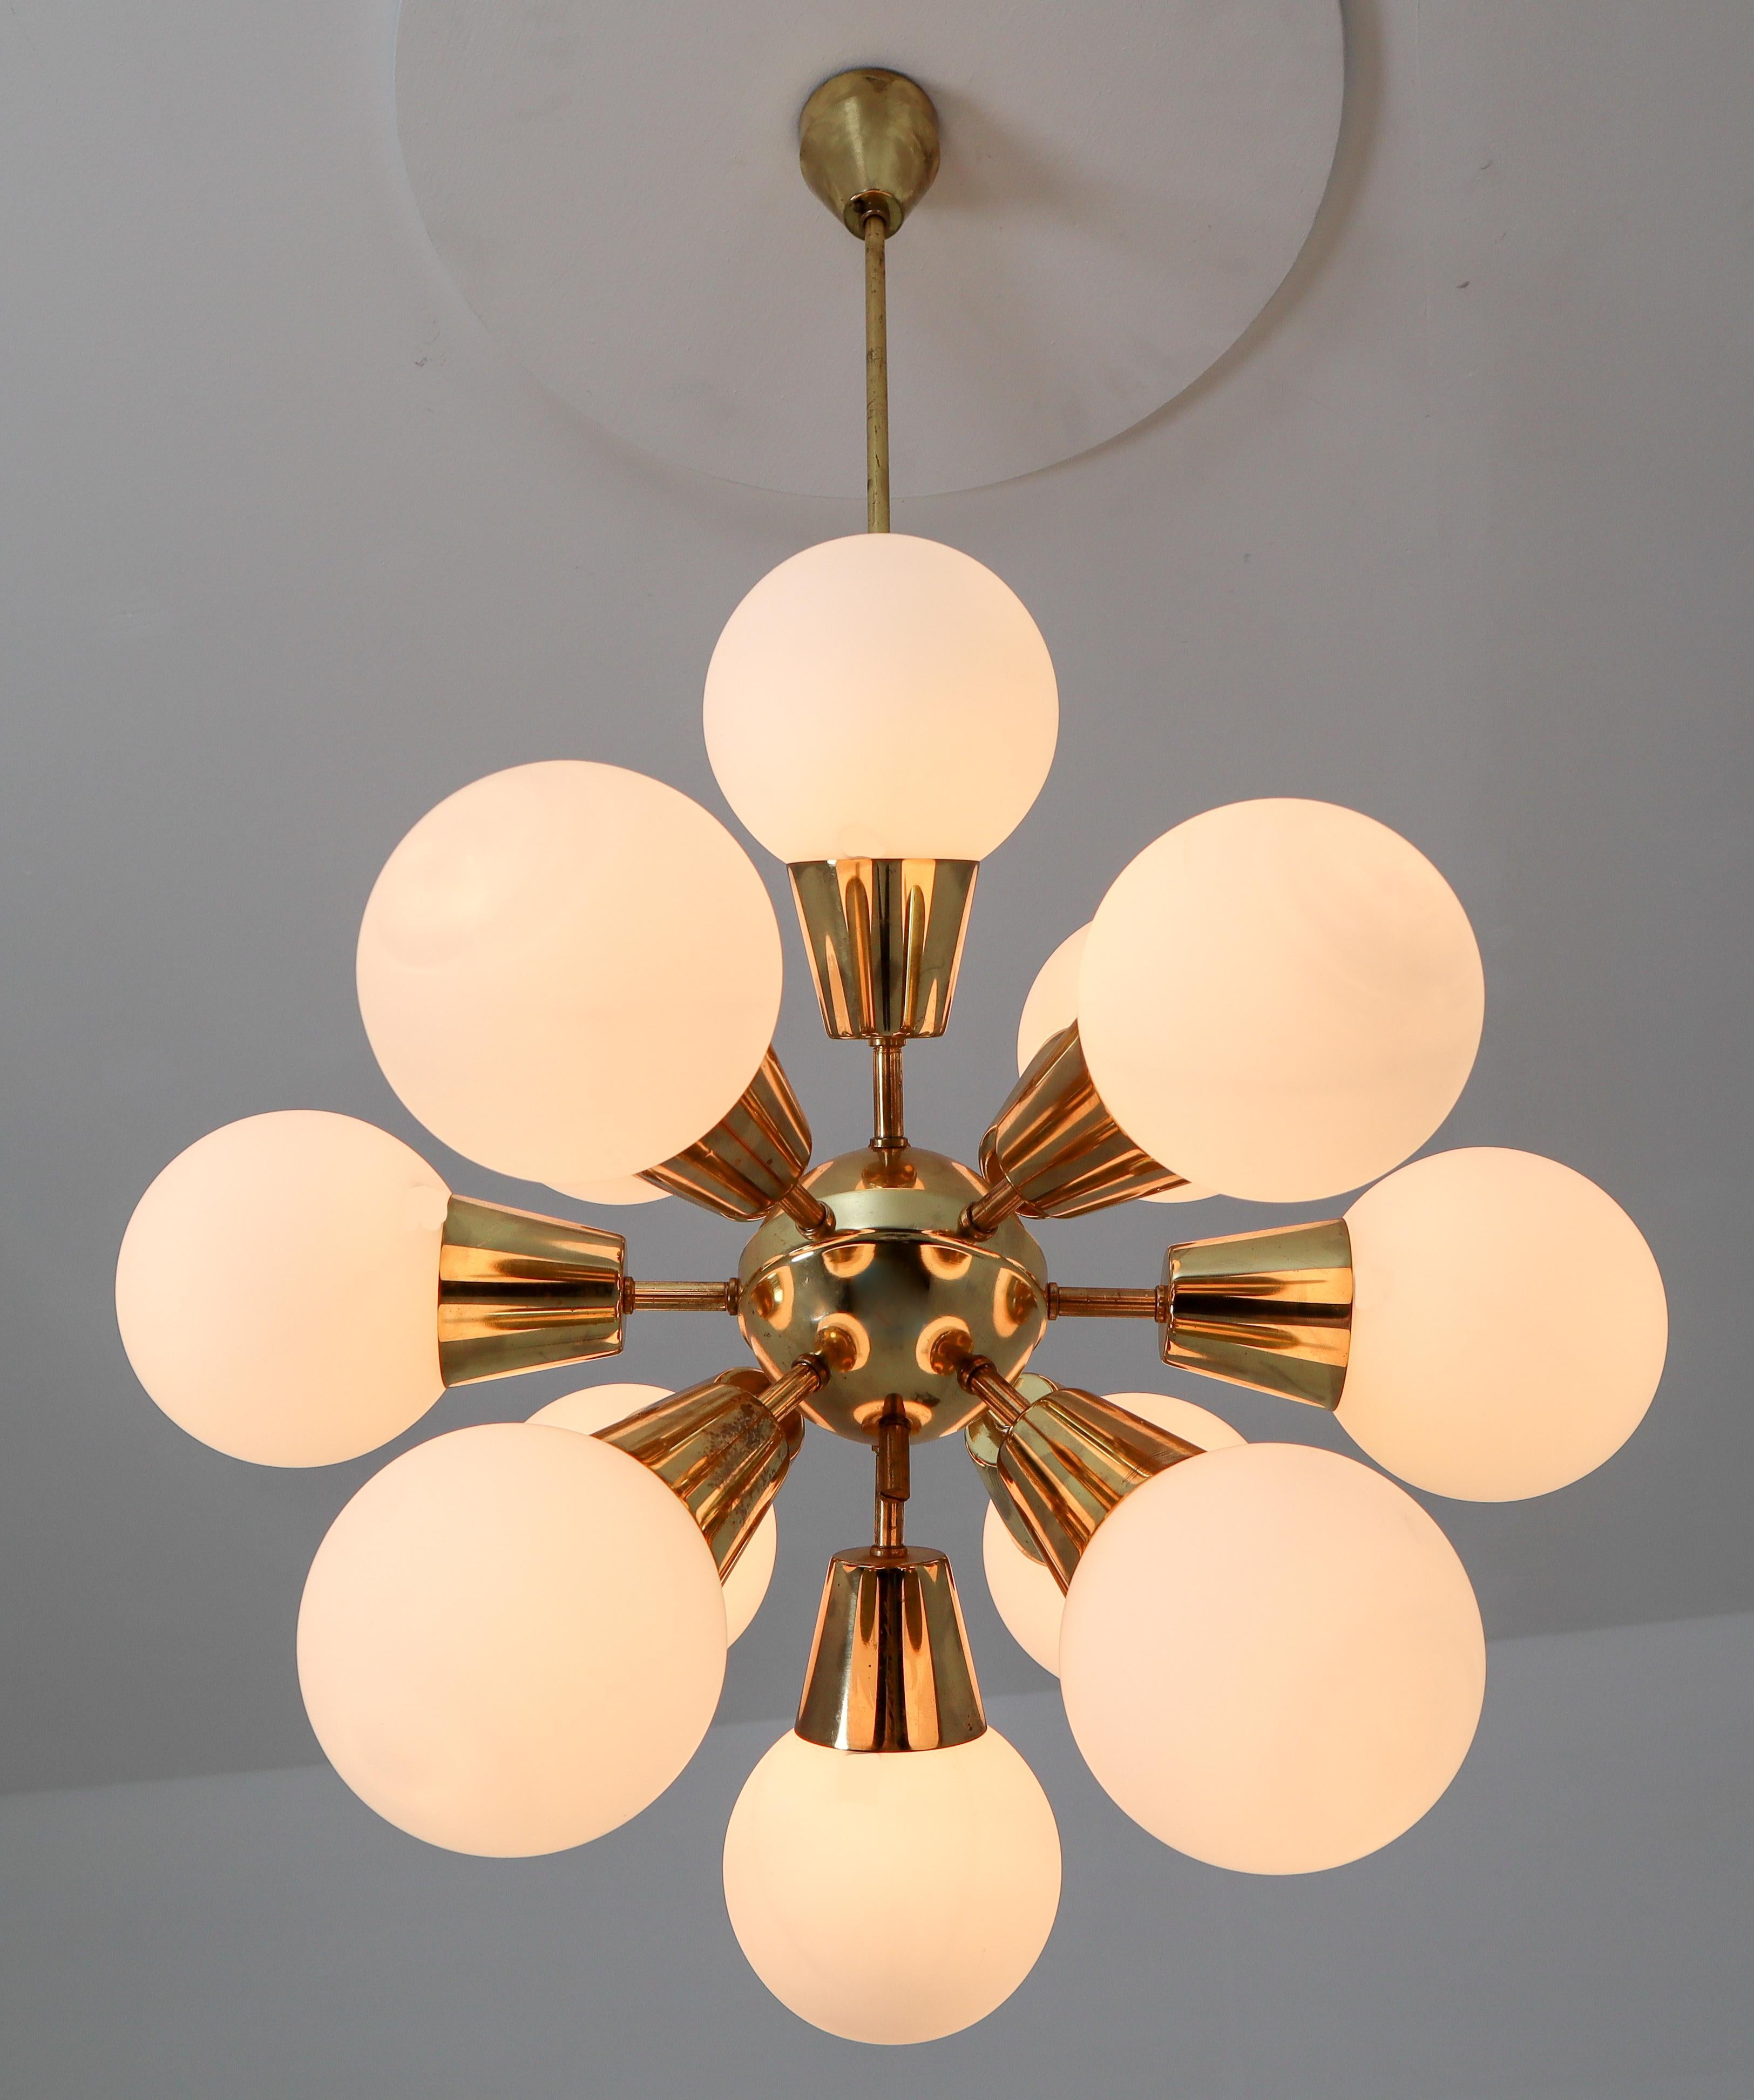 Sputnik chandelier with brass fixture and opaline spheres. These chandeliers with brass frame consist of twelve lights. The diffuse light it spreads is very atmospheric. Completed with the opaline glass and brass details, these chandeliers will